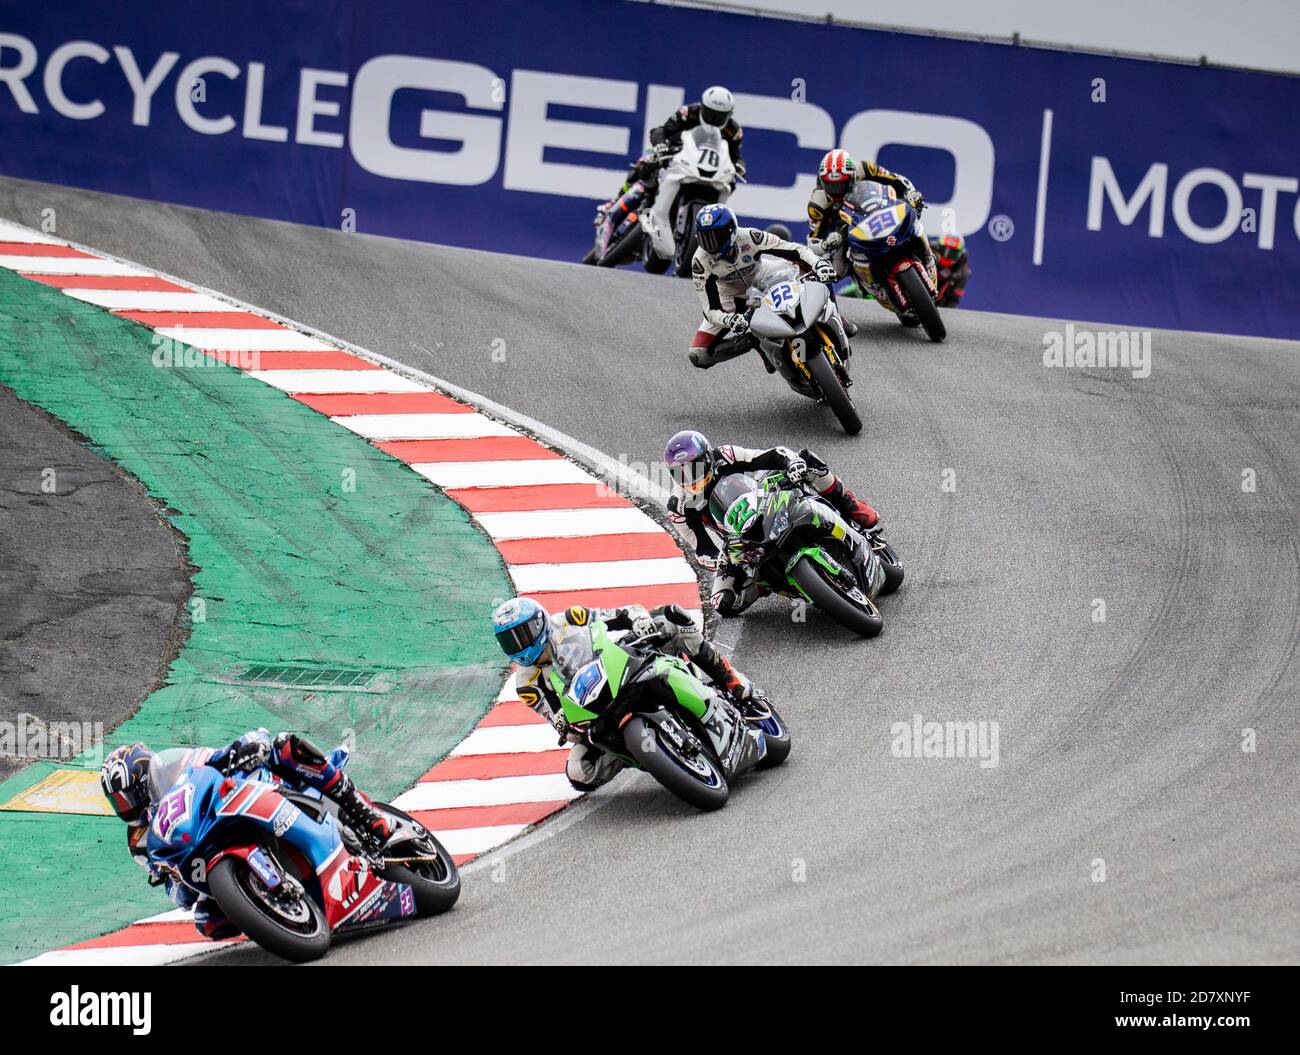 Oct 25 2020 Monterey, CA, U.S.A. # 23 Lucas Silva leads a pack of riders into the corkscrew during the Geico Motorcycle MotoAmerica Superbike Speedfest Supersport race # 2 at Weathertech Laguna Seca Monterey, CA Thurman James/CSM Stock Photo